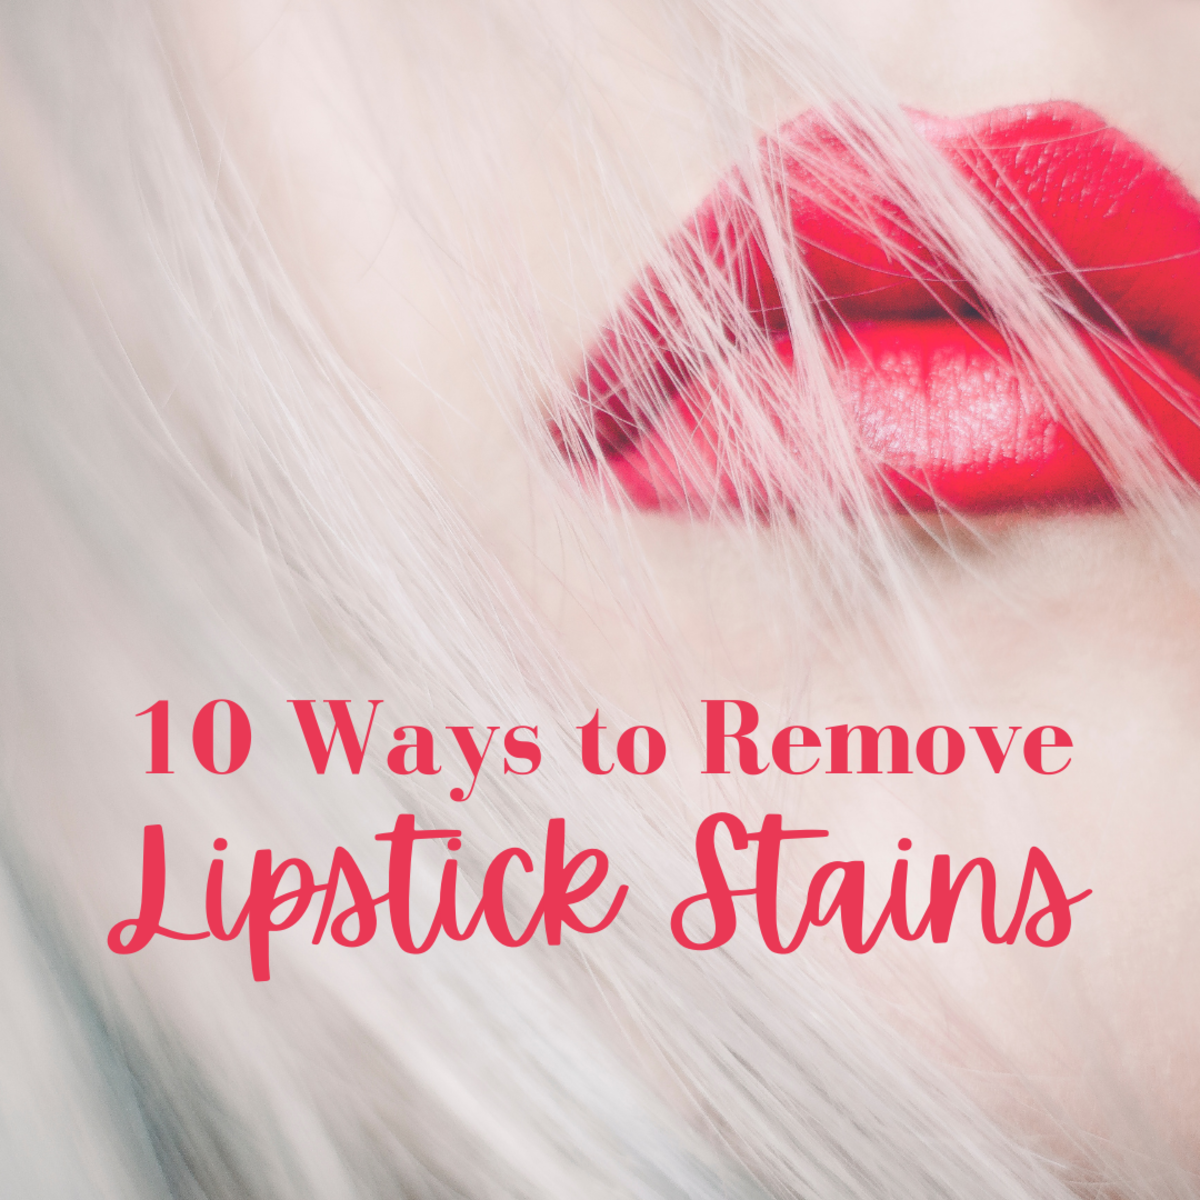 Lipstick Stain Removal: How to Get Lipstick Out of Clothes